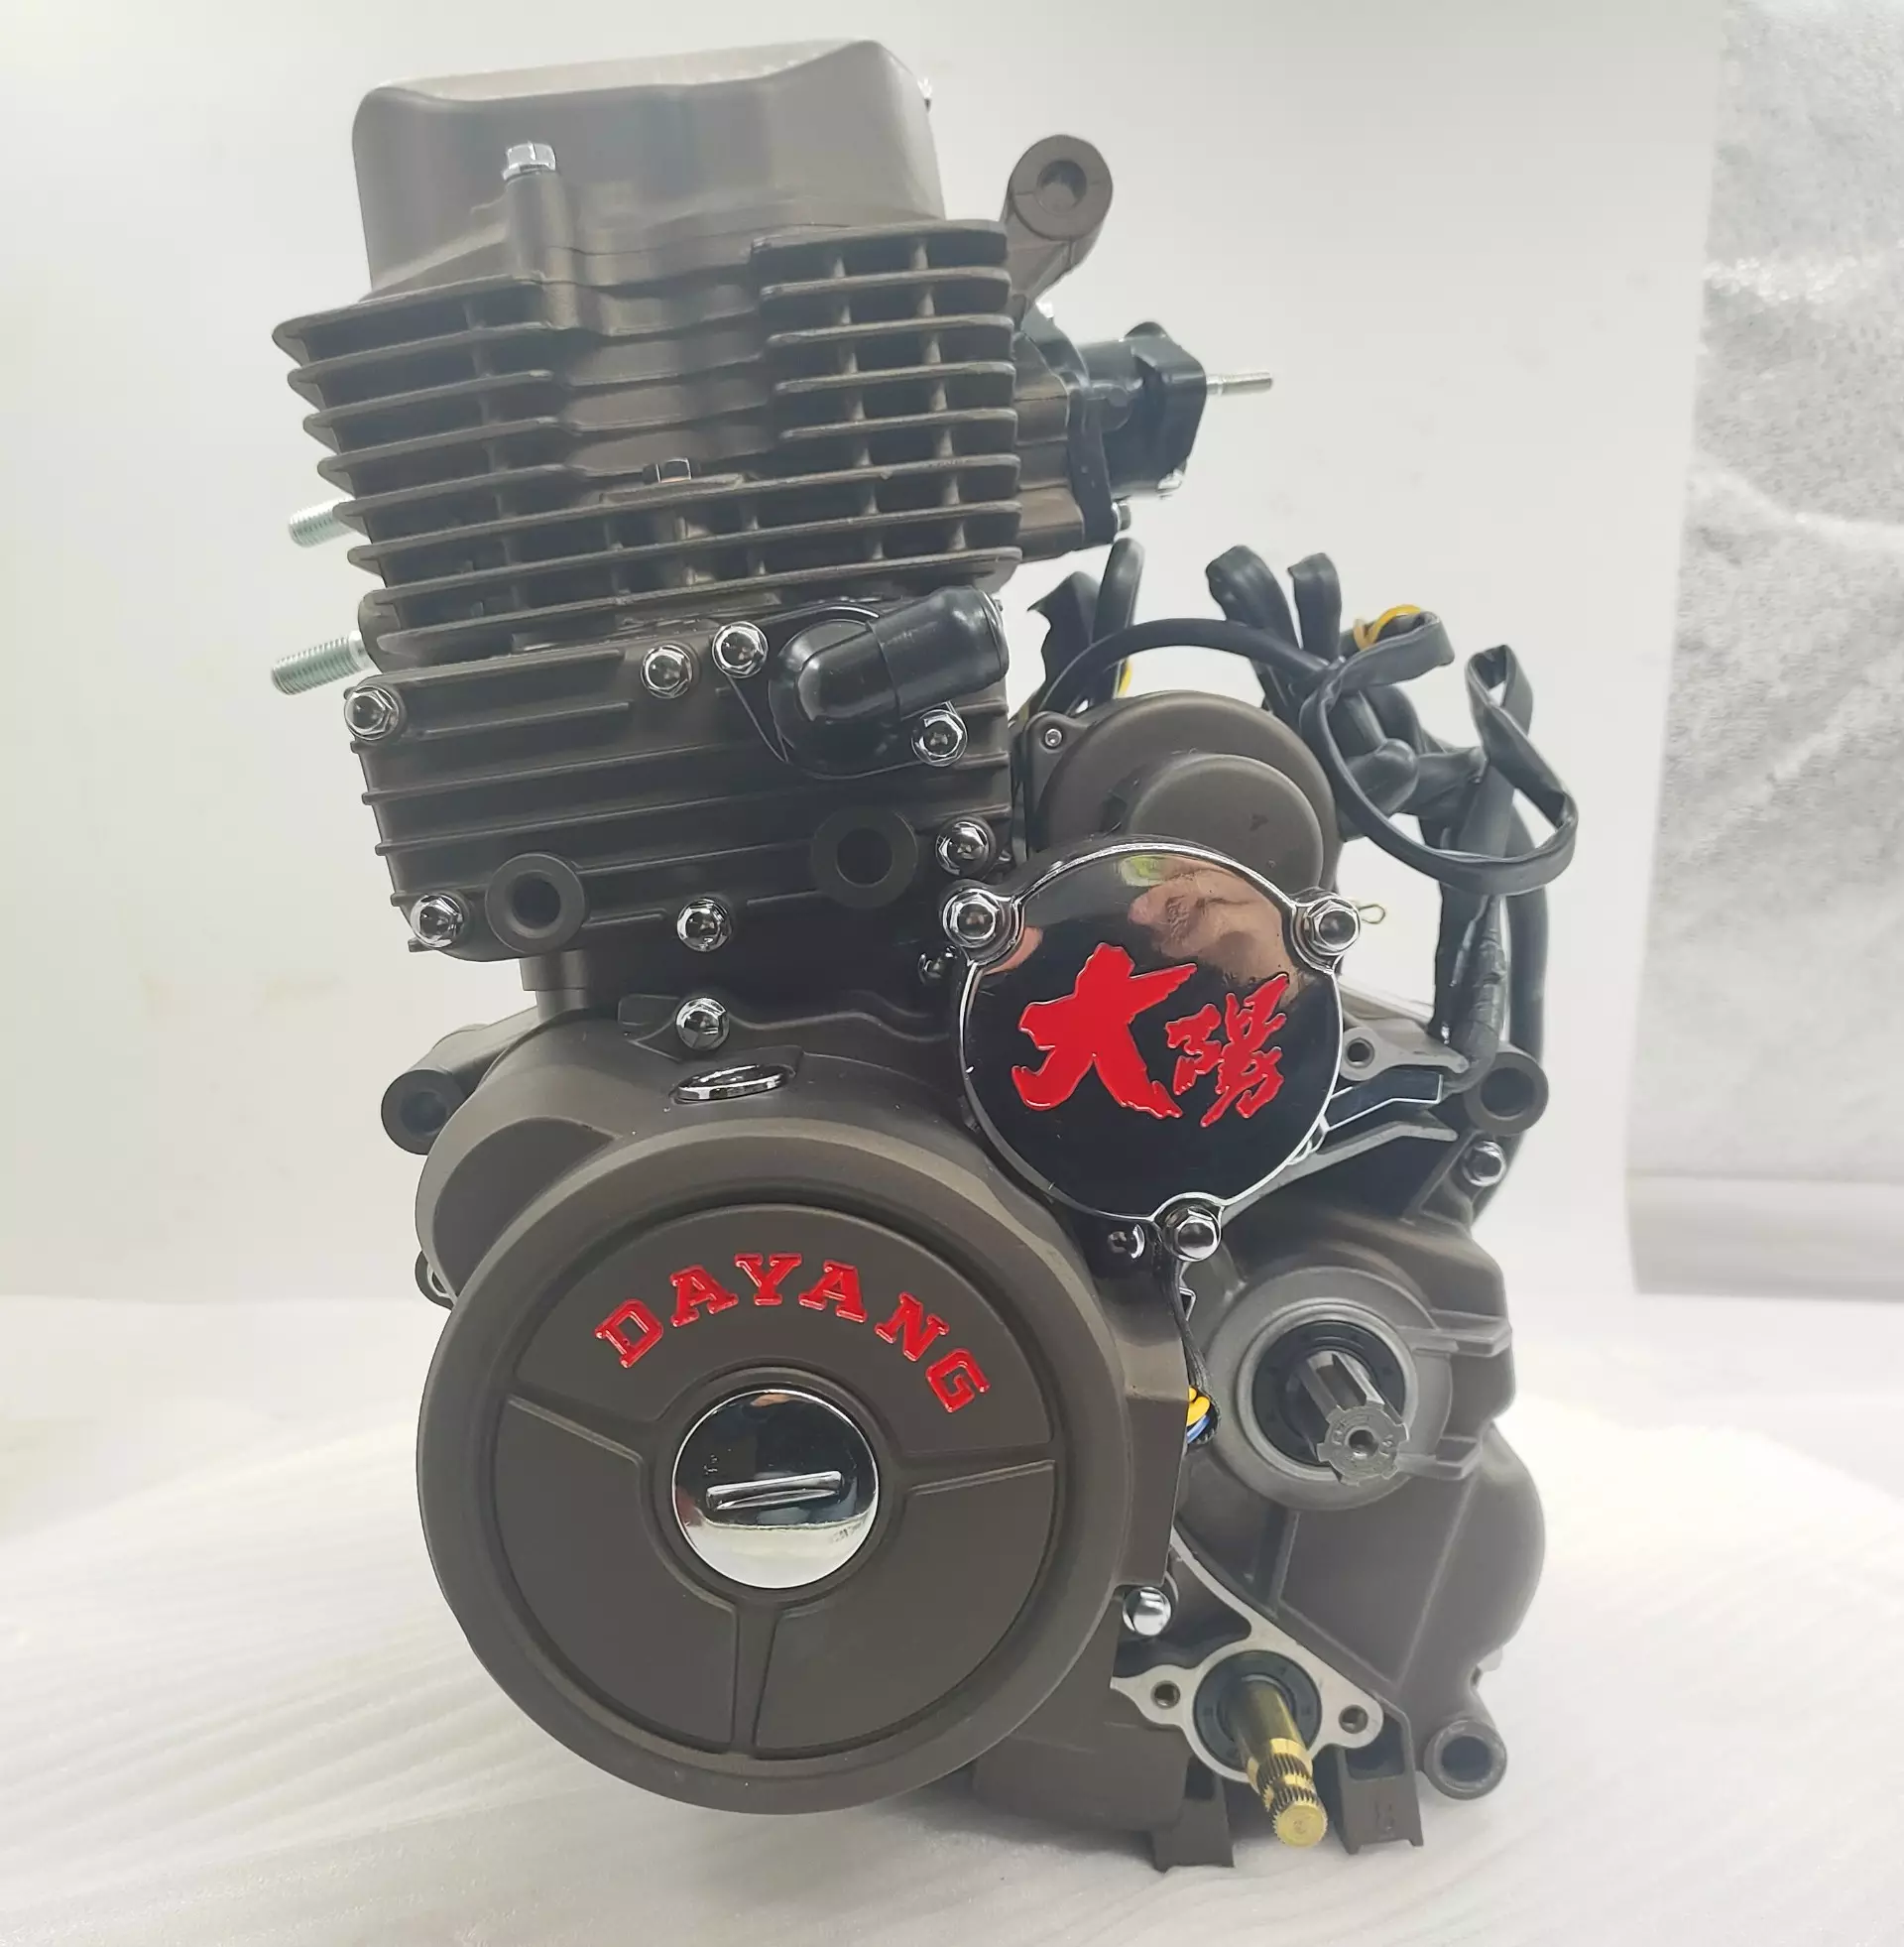 CG175cc Cool with the pump DAYANG LIFAN Motorcycle Engine Assembly Single Cylinder Four Stroke Style China CCC Origin Type